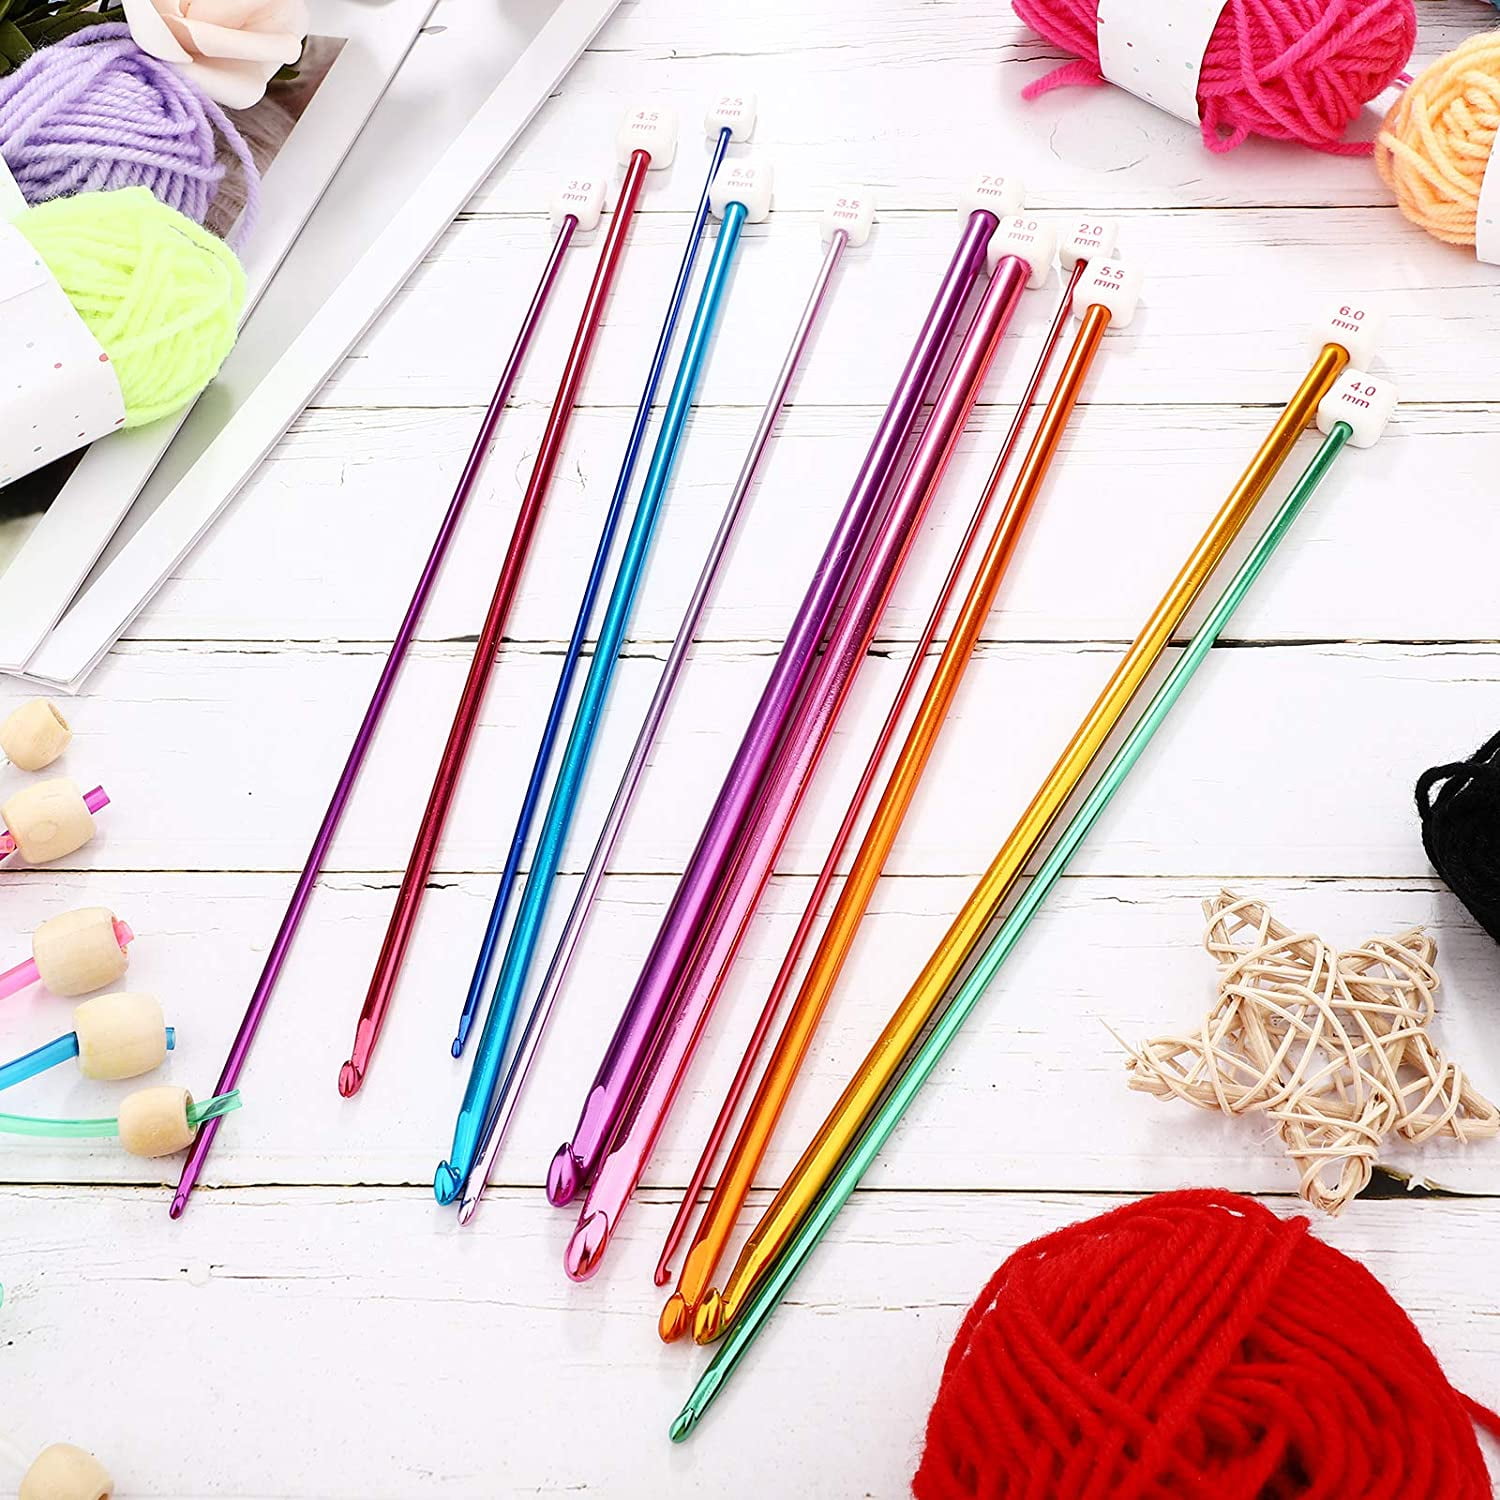 Kitcheniva Afghan Tunisian Crochet Hook Set With Cable